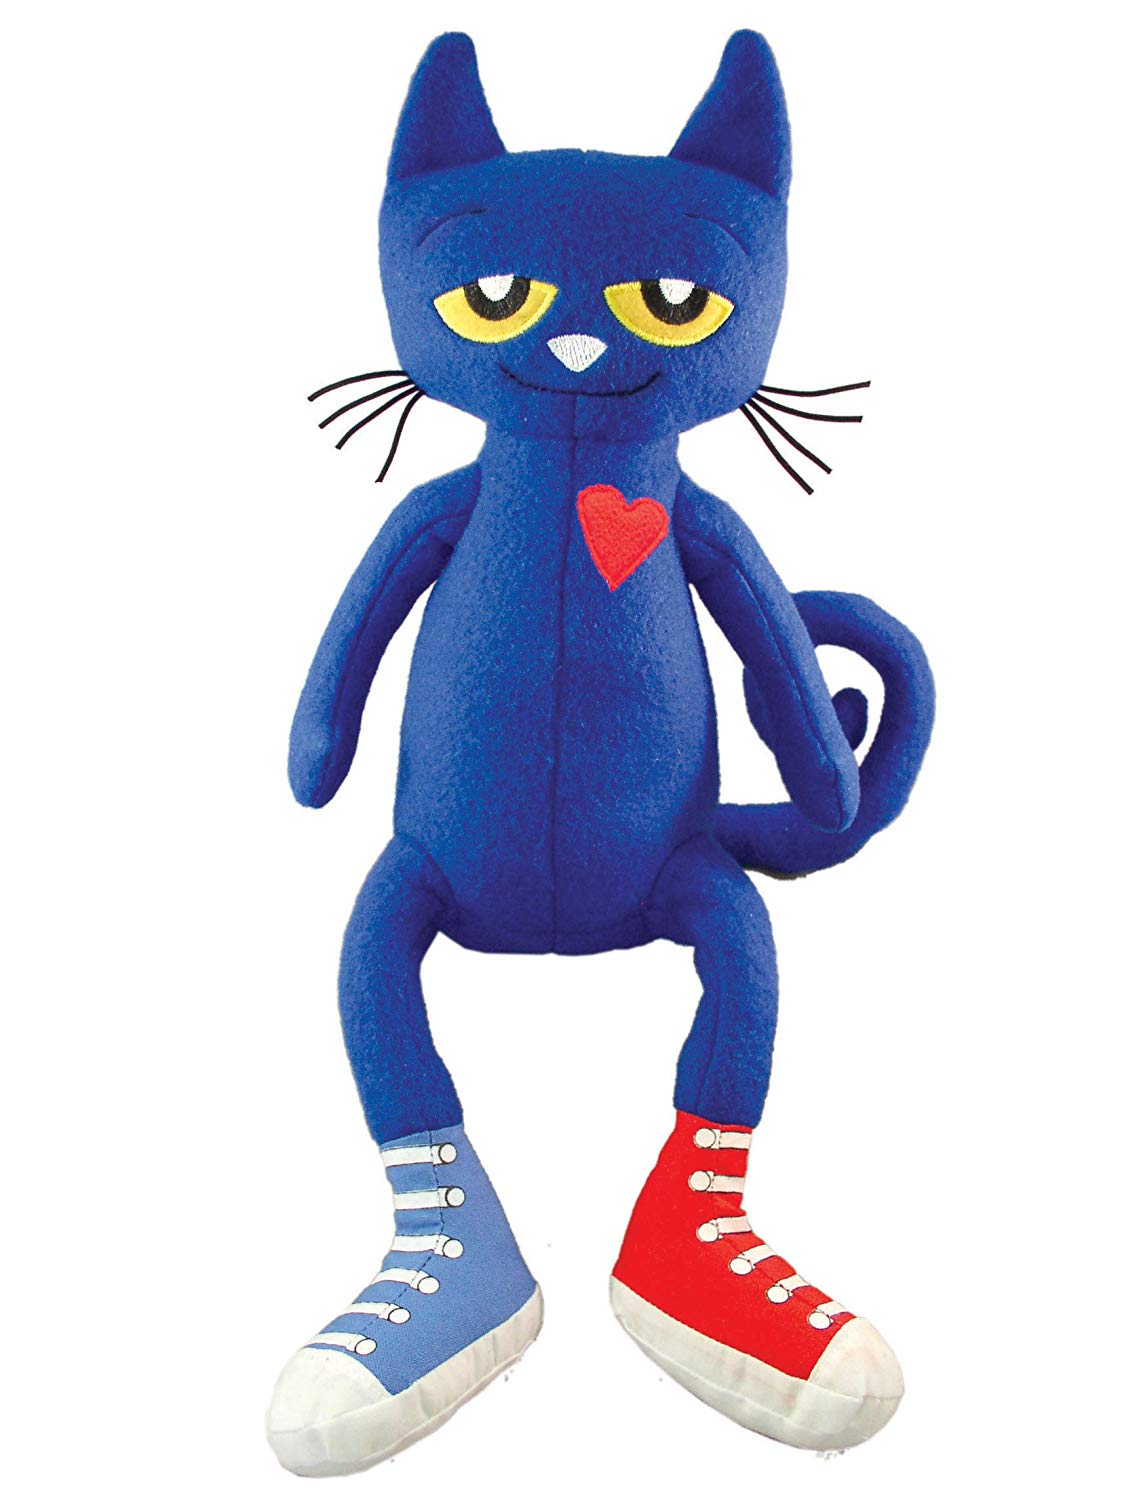 Pete the cat stuffed toy